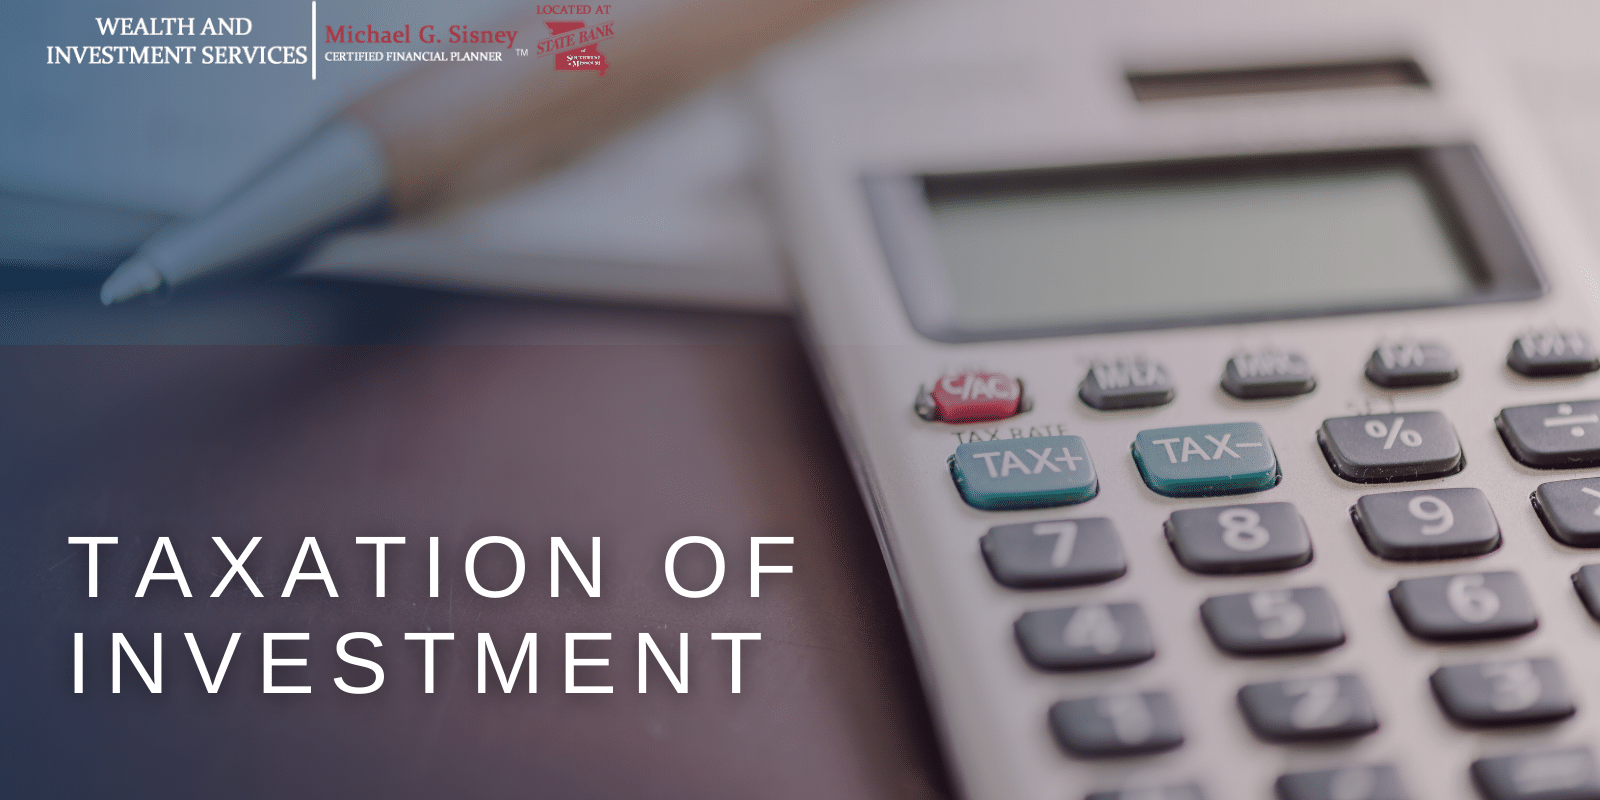 TAXATION OF INVESTMENTS